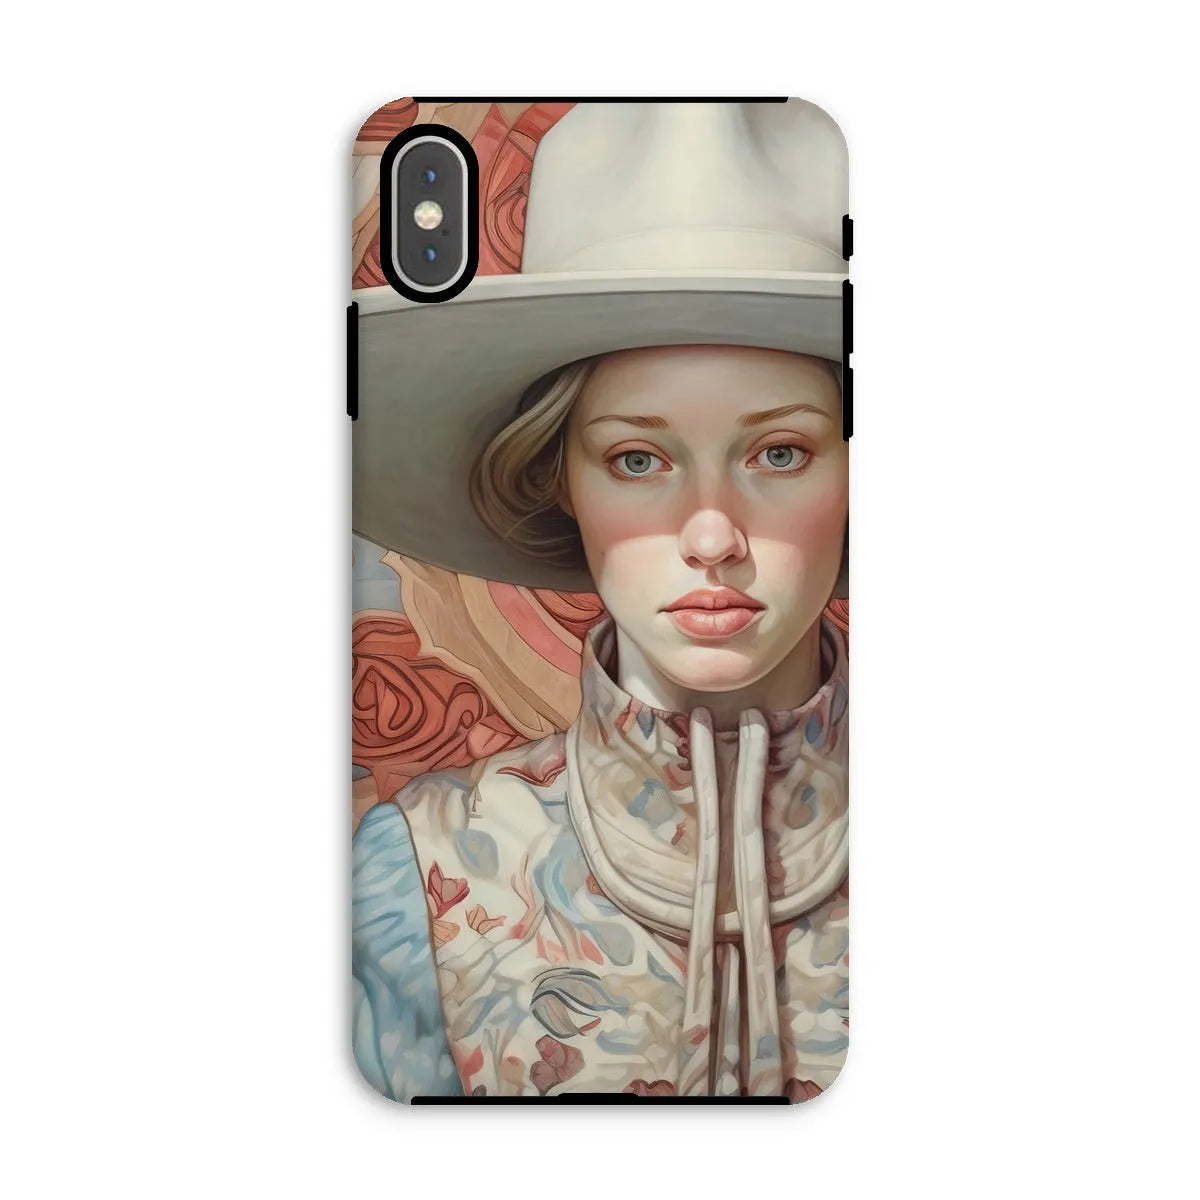 Lottie The Lesbian Cowgirl - Sapphic Art Phone Case - Iphone Xs Max / Matte - Mobile Phone Cases - Aesthetic Art